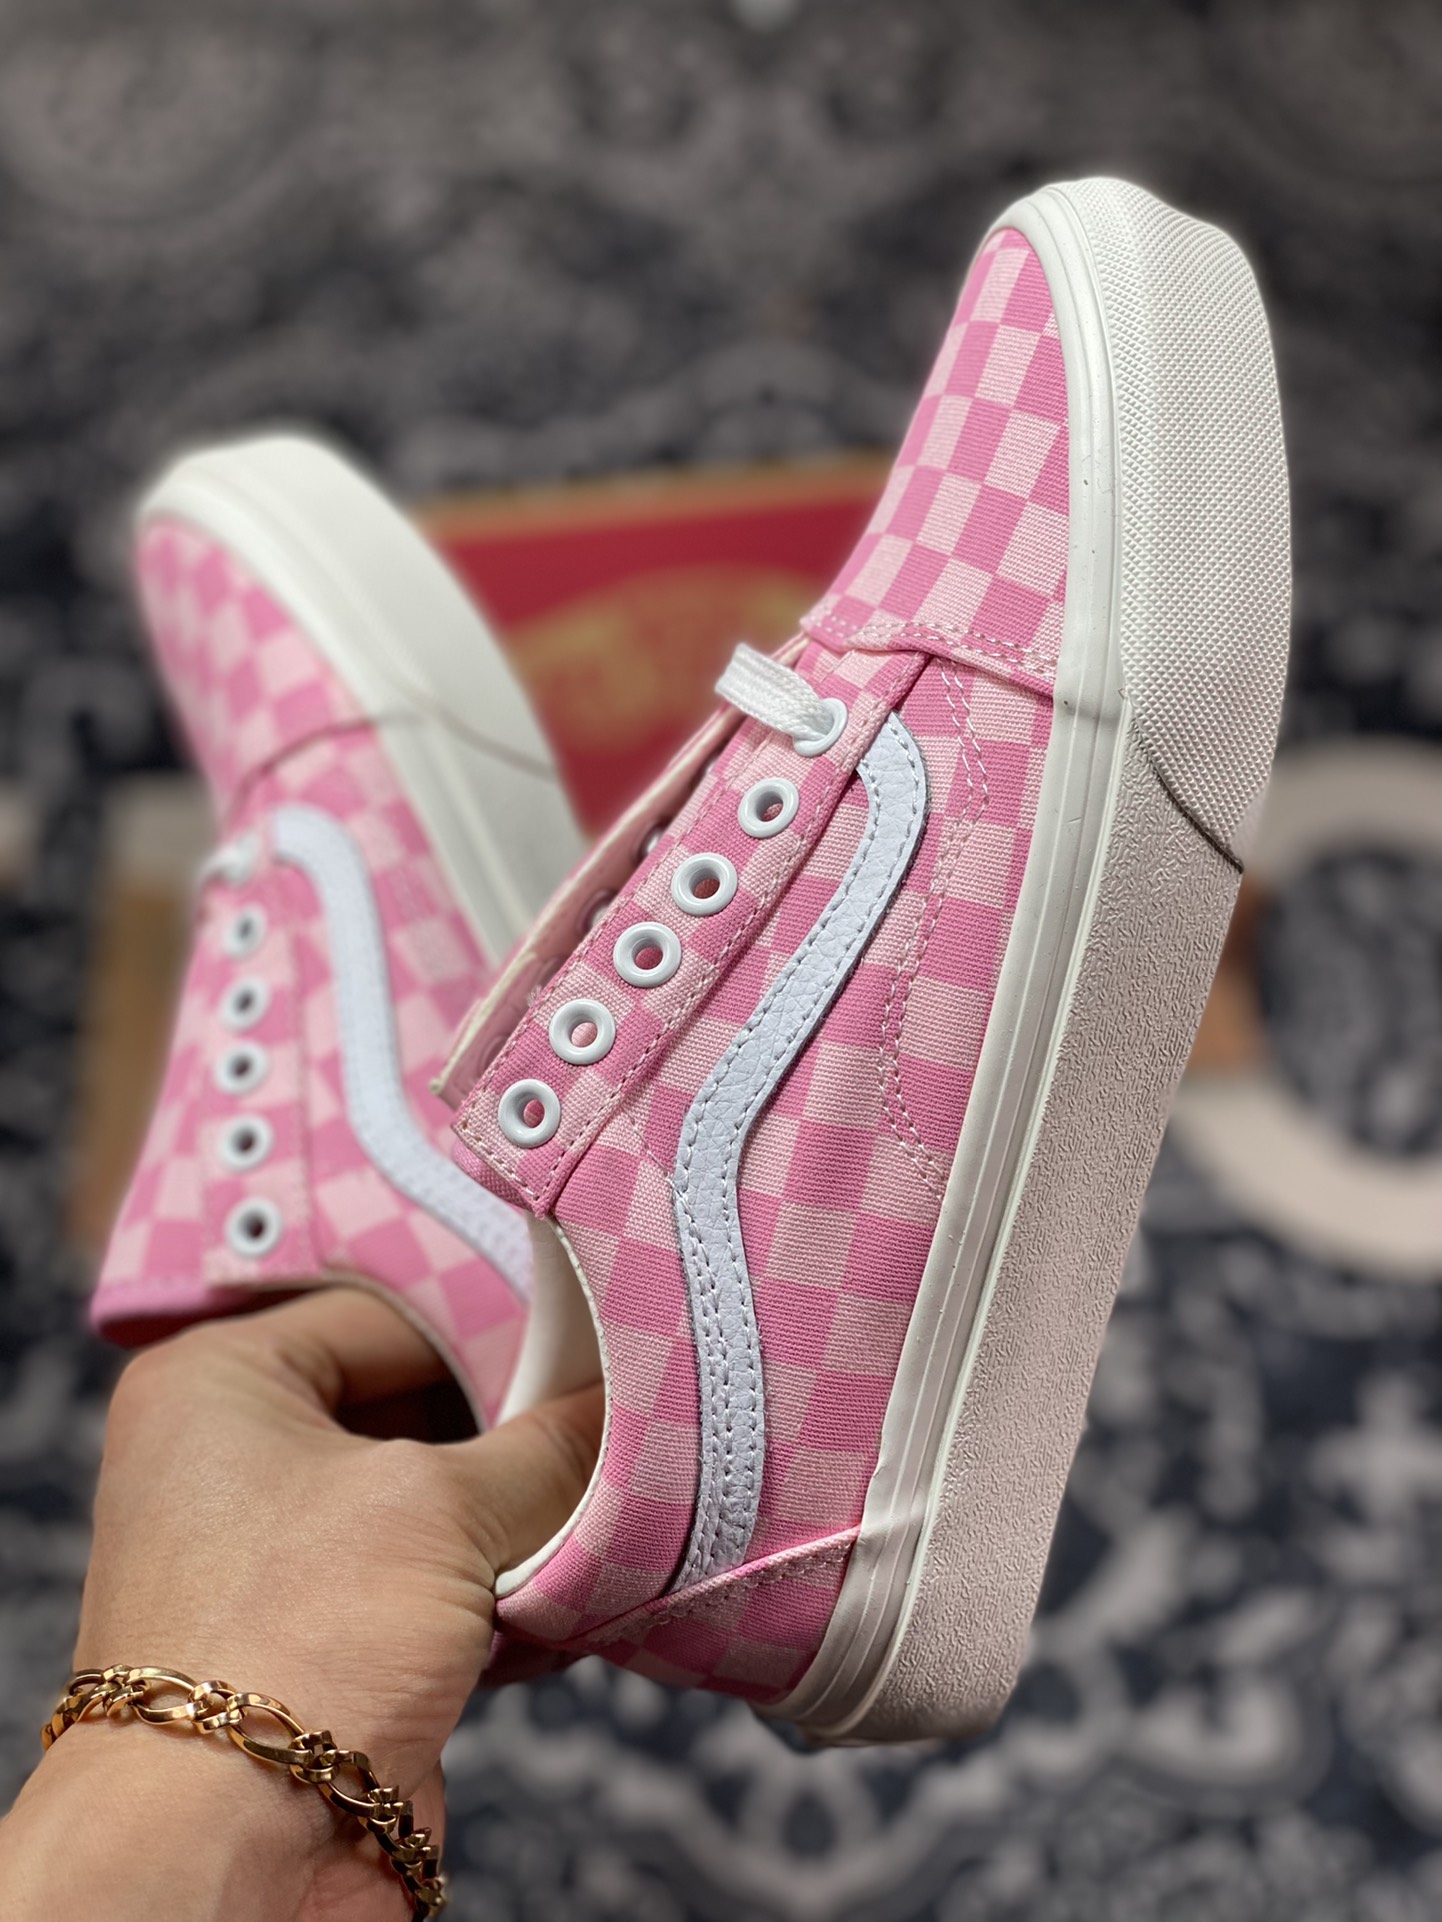 Vans Old Skool cherry blossom pink checkerboard Vans official casual canvas vulcanized shoes VN0A7Q2JZY2